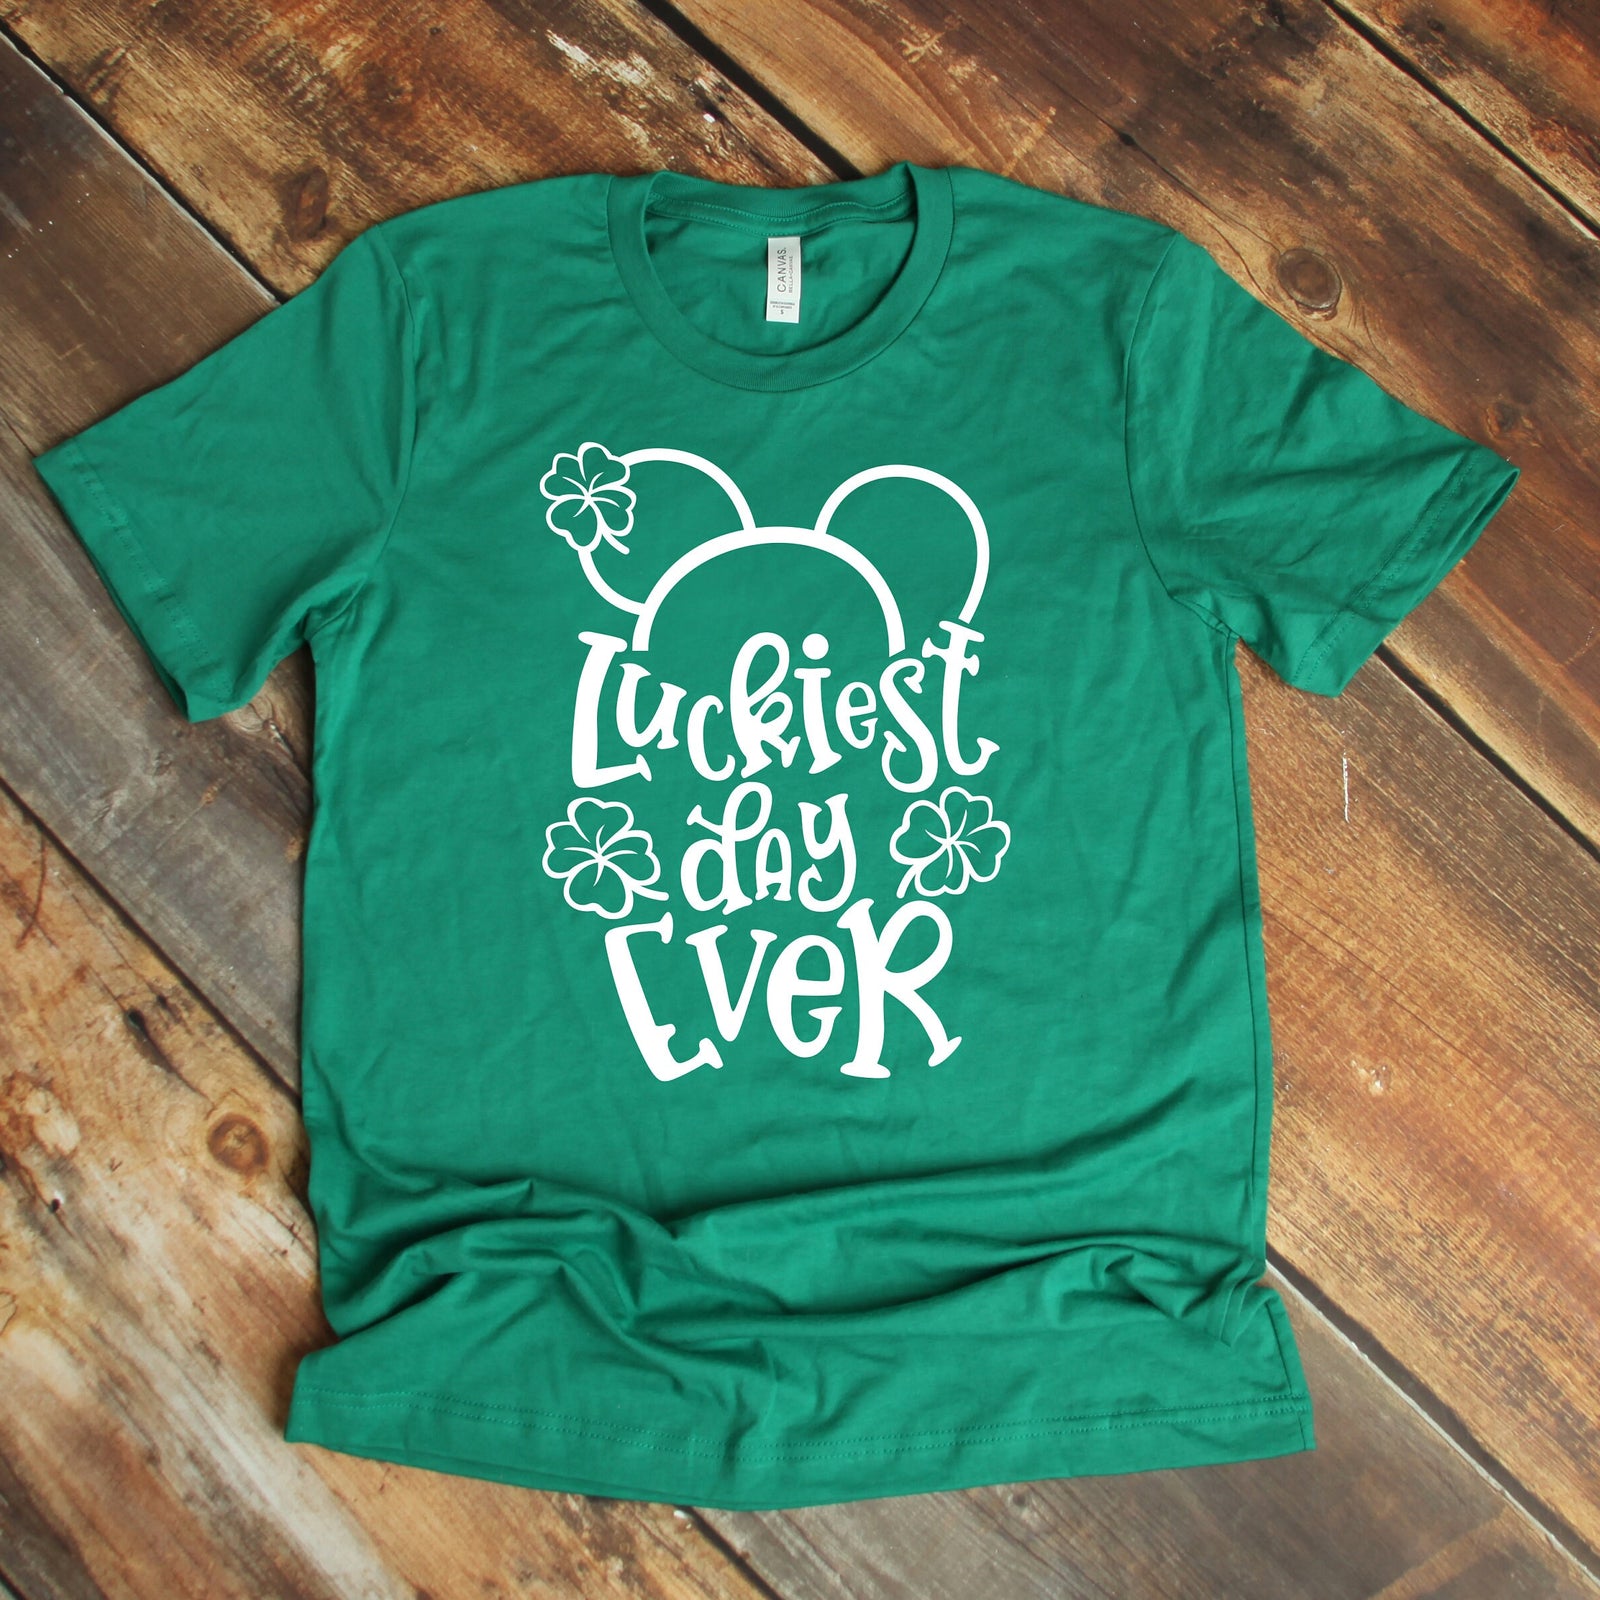 Luckiest Day Ever - St. Patrick's Day Mickey Mouse T Shirt- Shamrock - Clover - Lucky Mickey - Disney St. Patty's Day